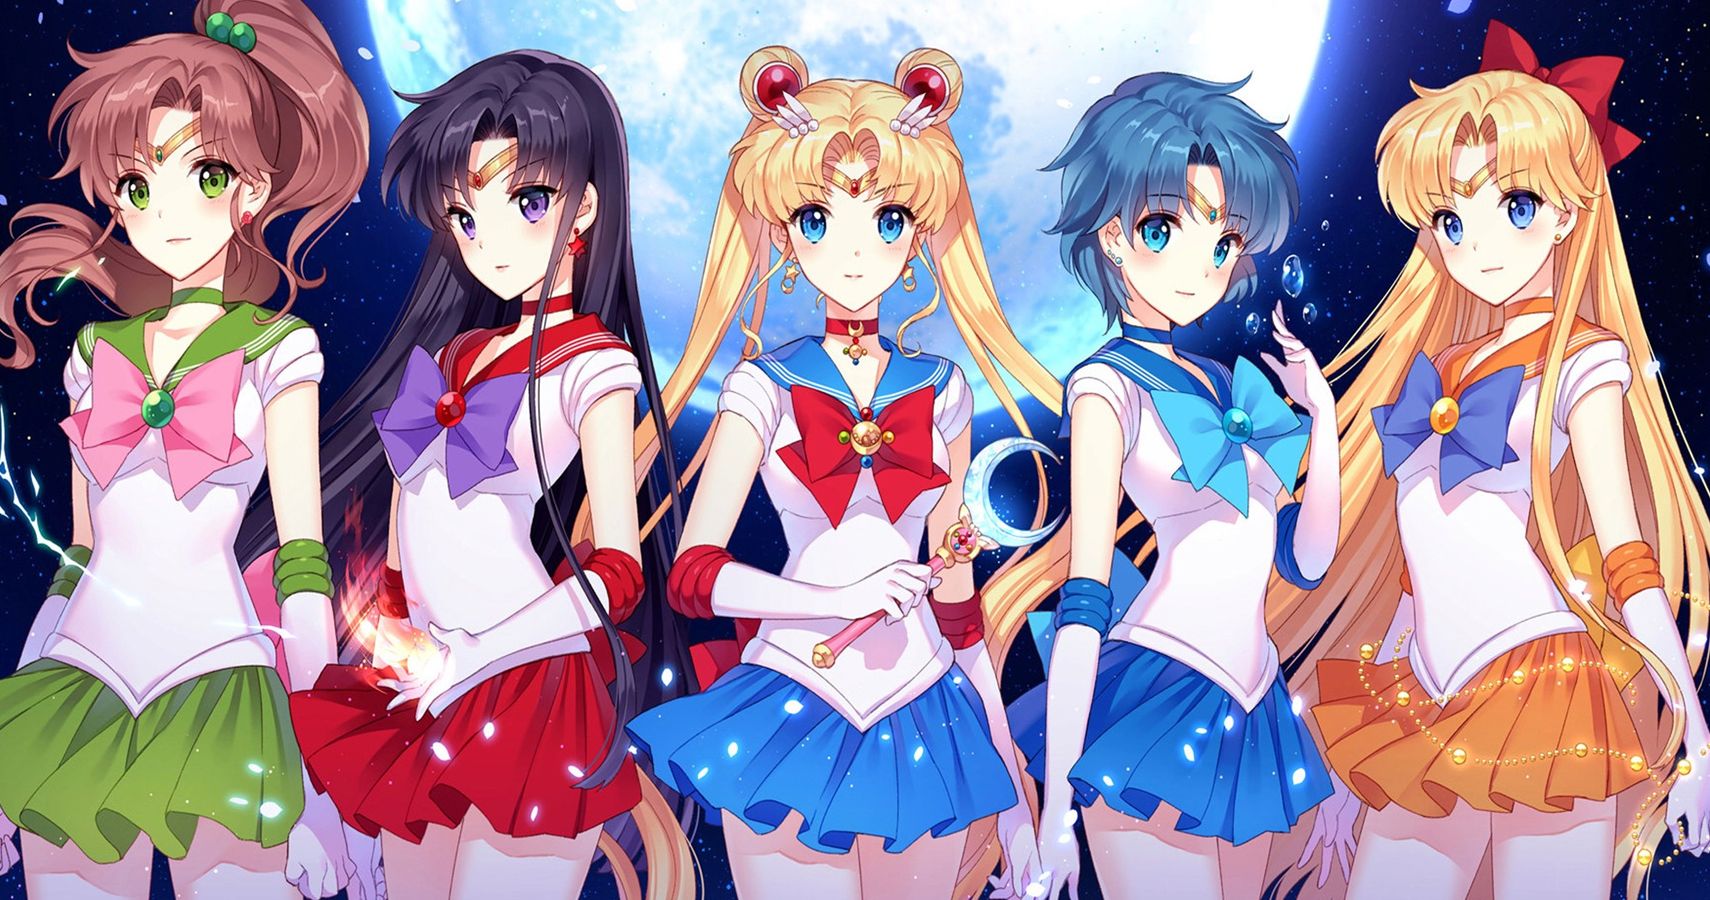 Sailor Moon anime from the 90s now available for free on YouTube